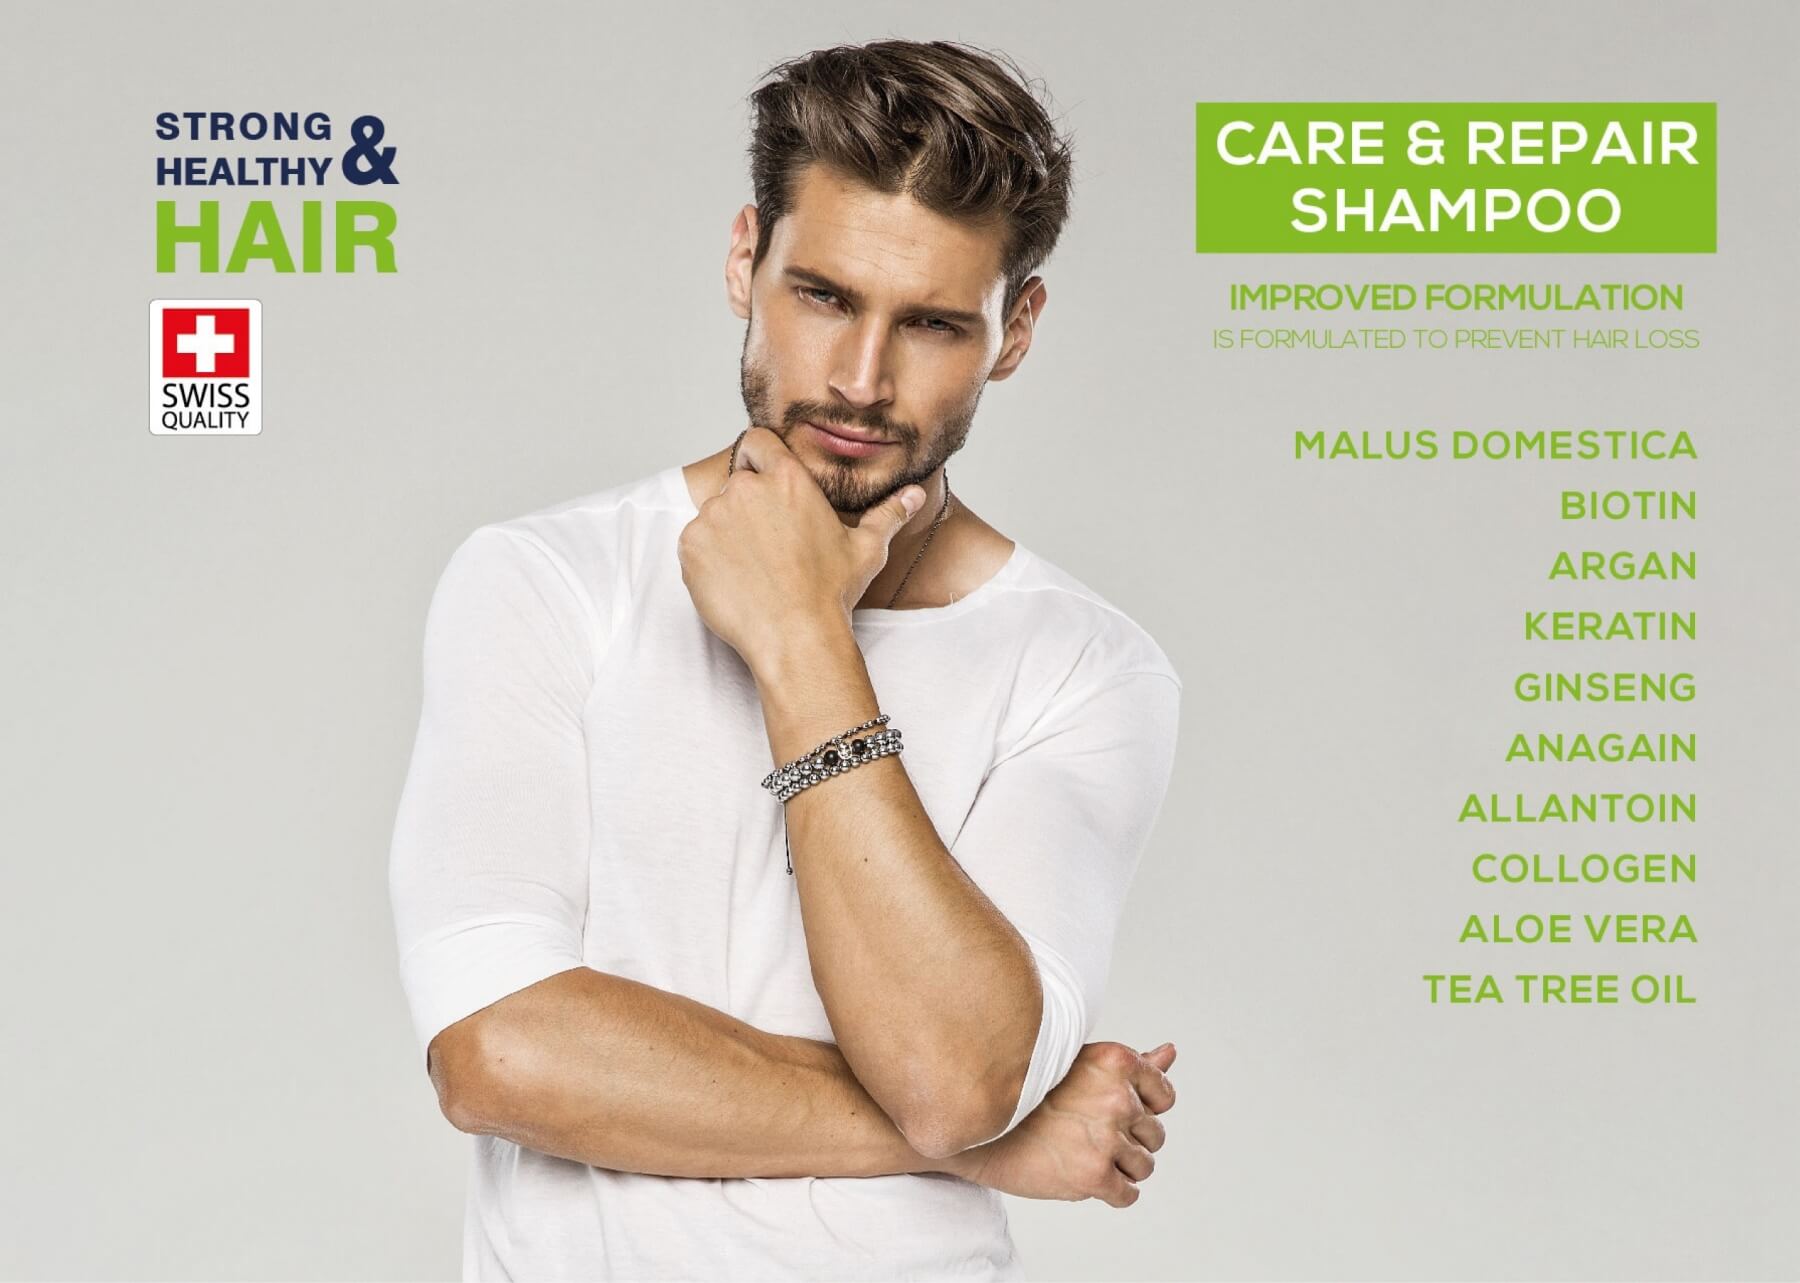 CLINICAL HAIR CARE PRODUCTS - Carine Medical